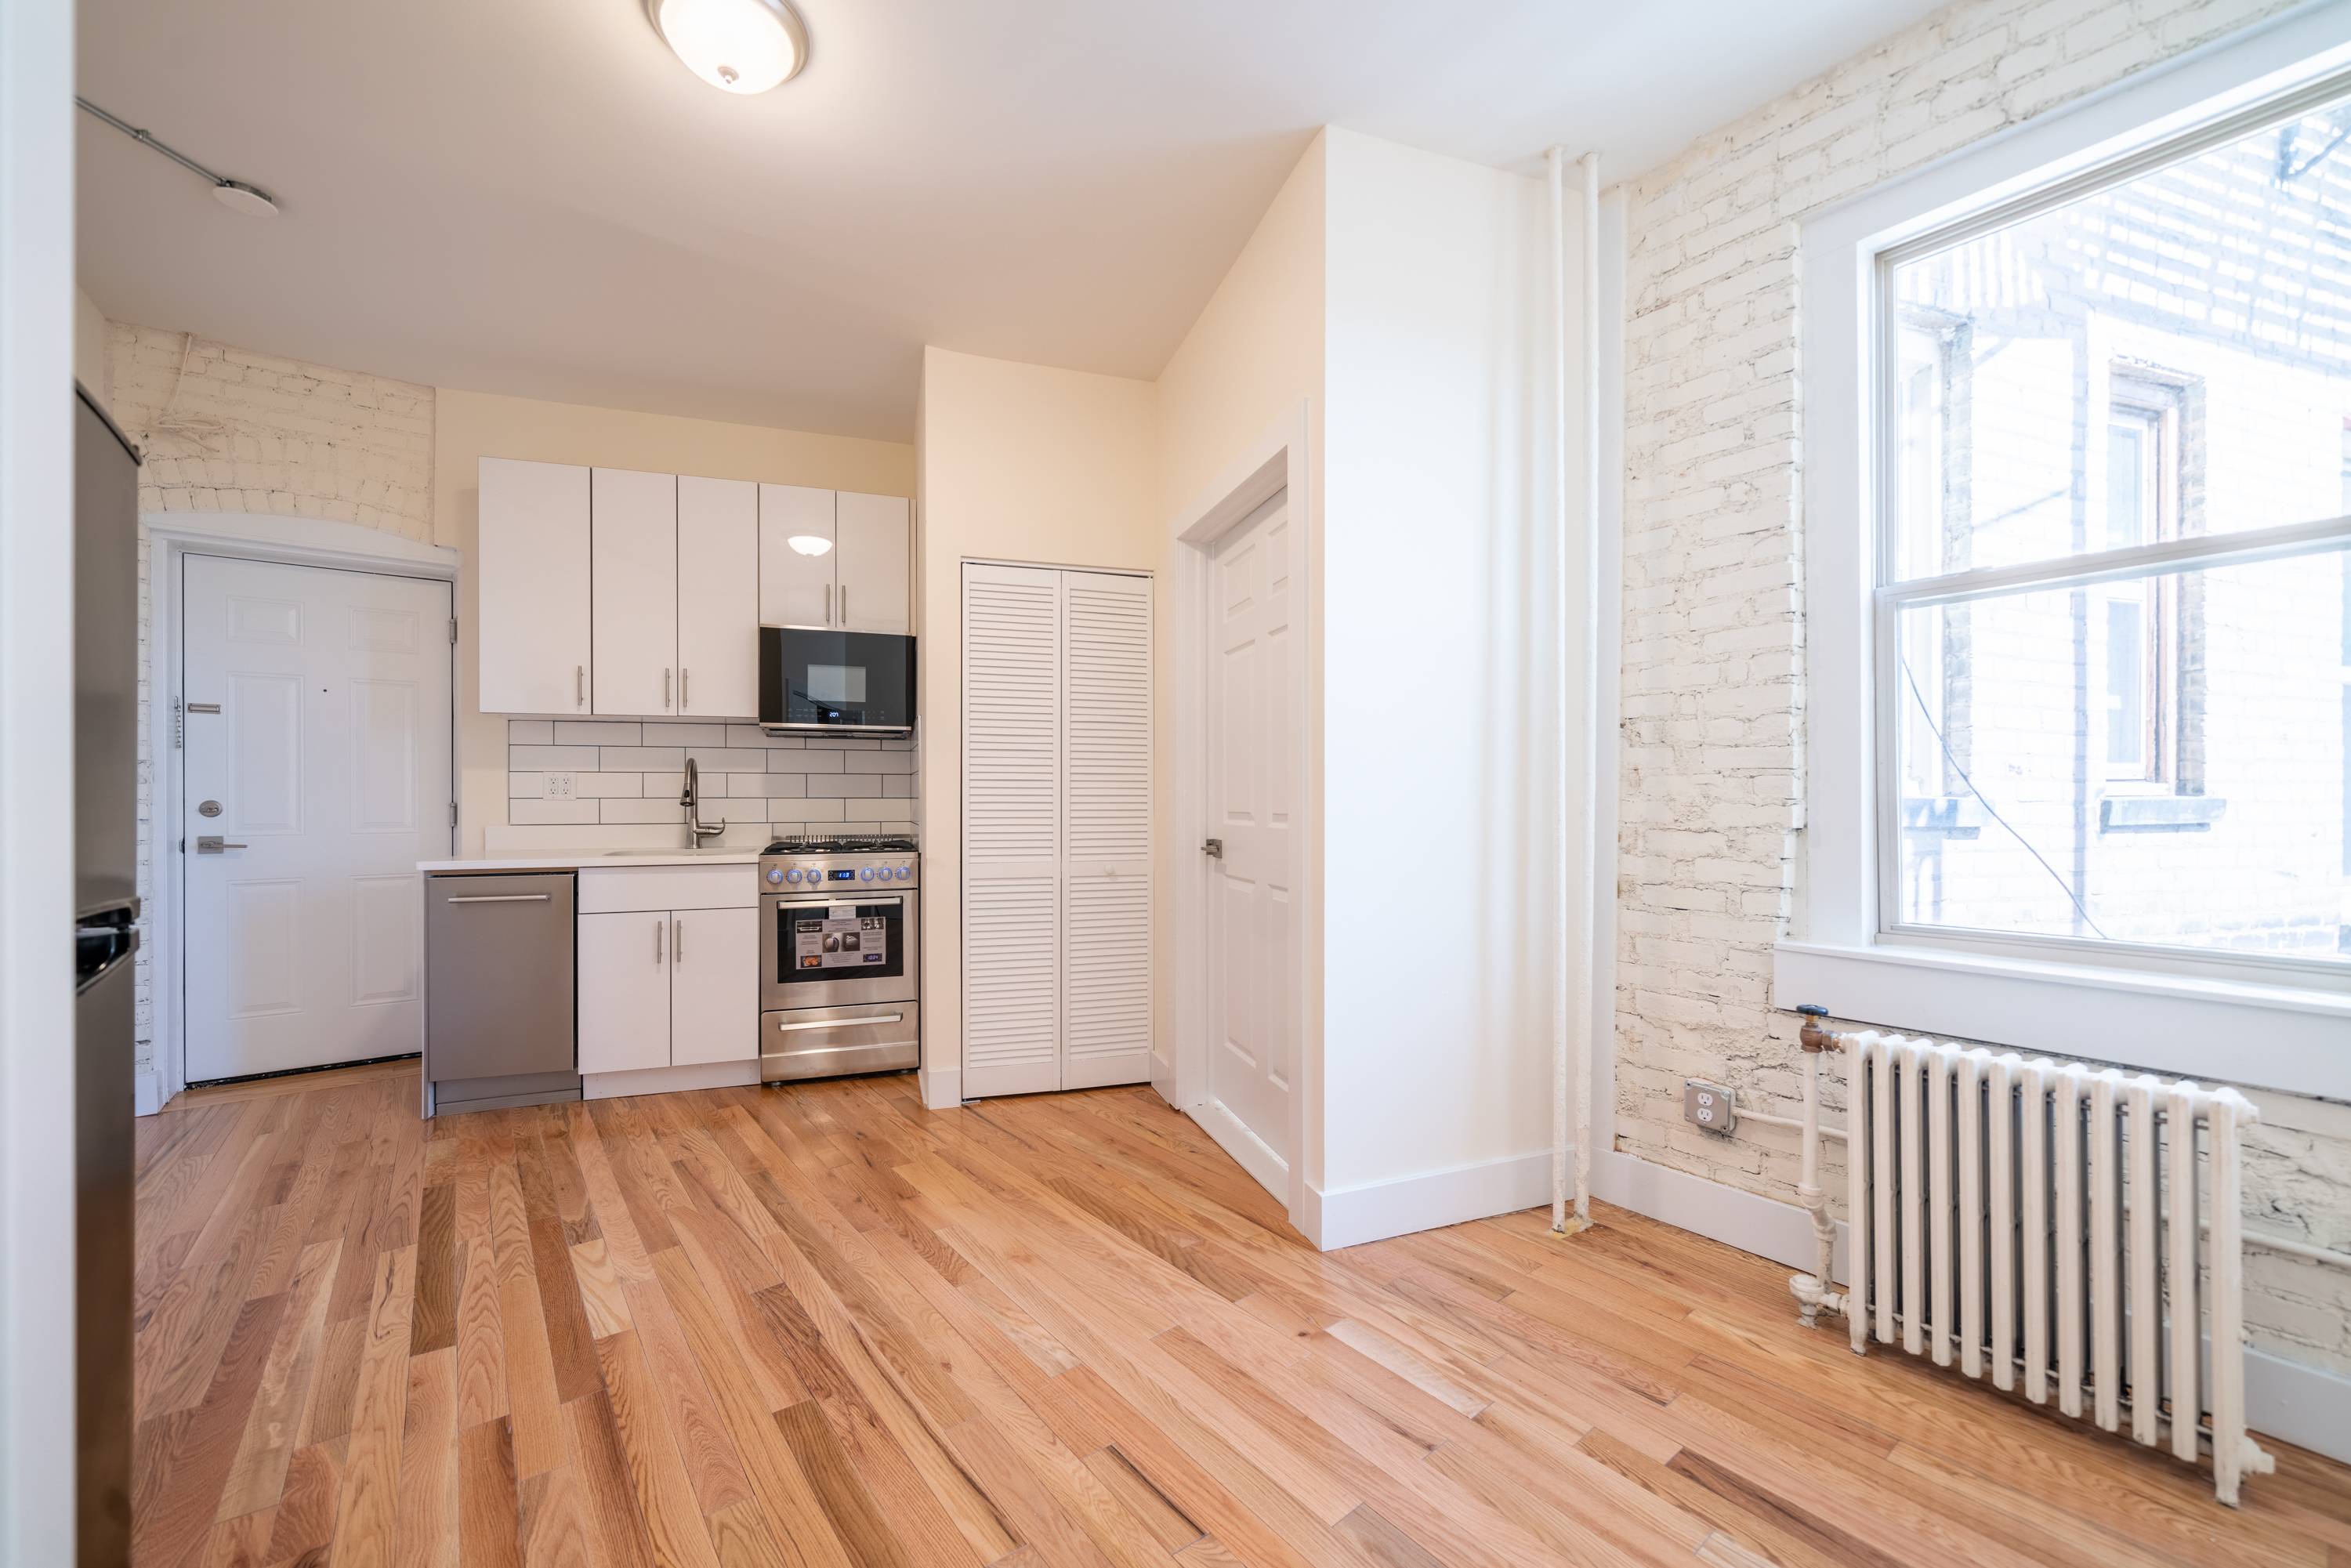 Studio - Stunning Renovated Studio in Prime Journal Square Location! Laundry on Site, Seconds to the Journal Square Path Transportation Center!